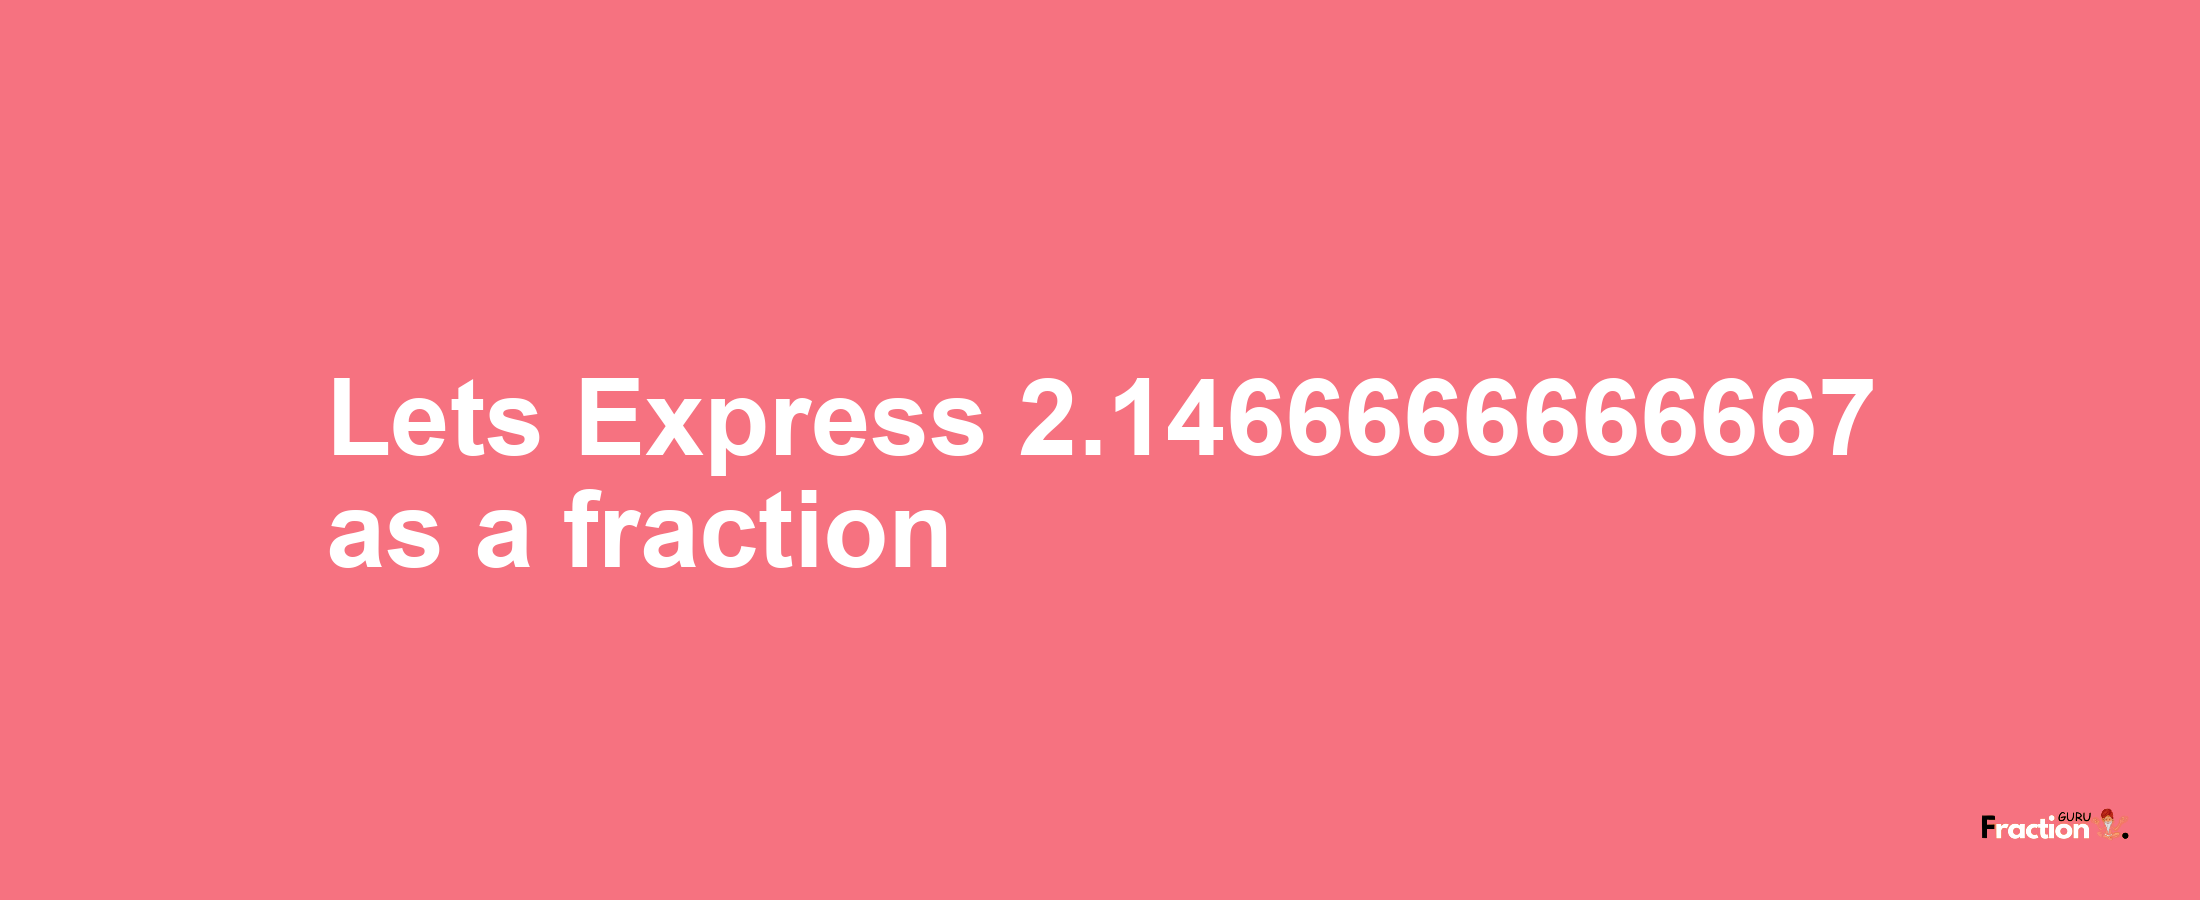 Lets Express 2.1466666666667 as afraction